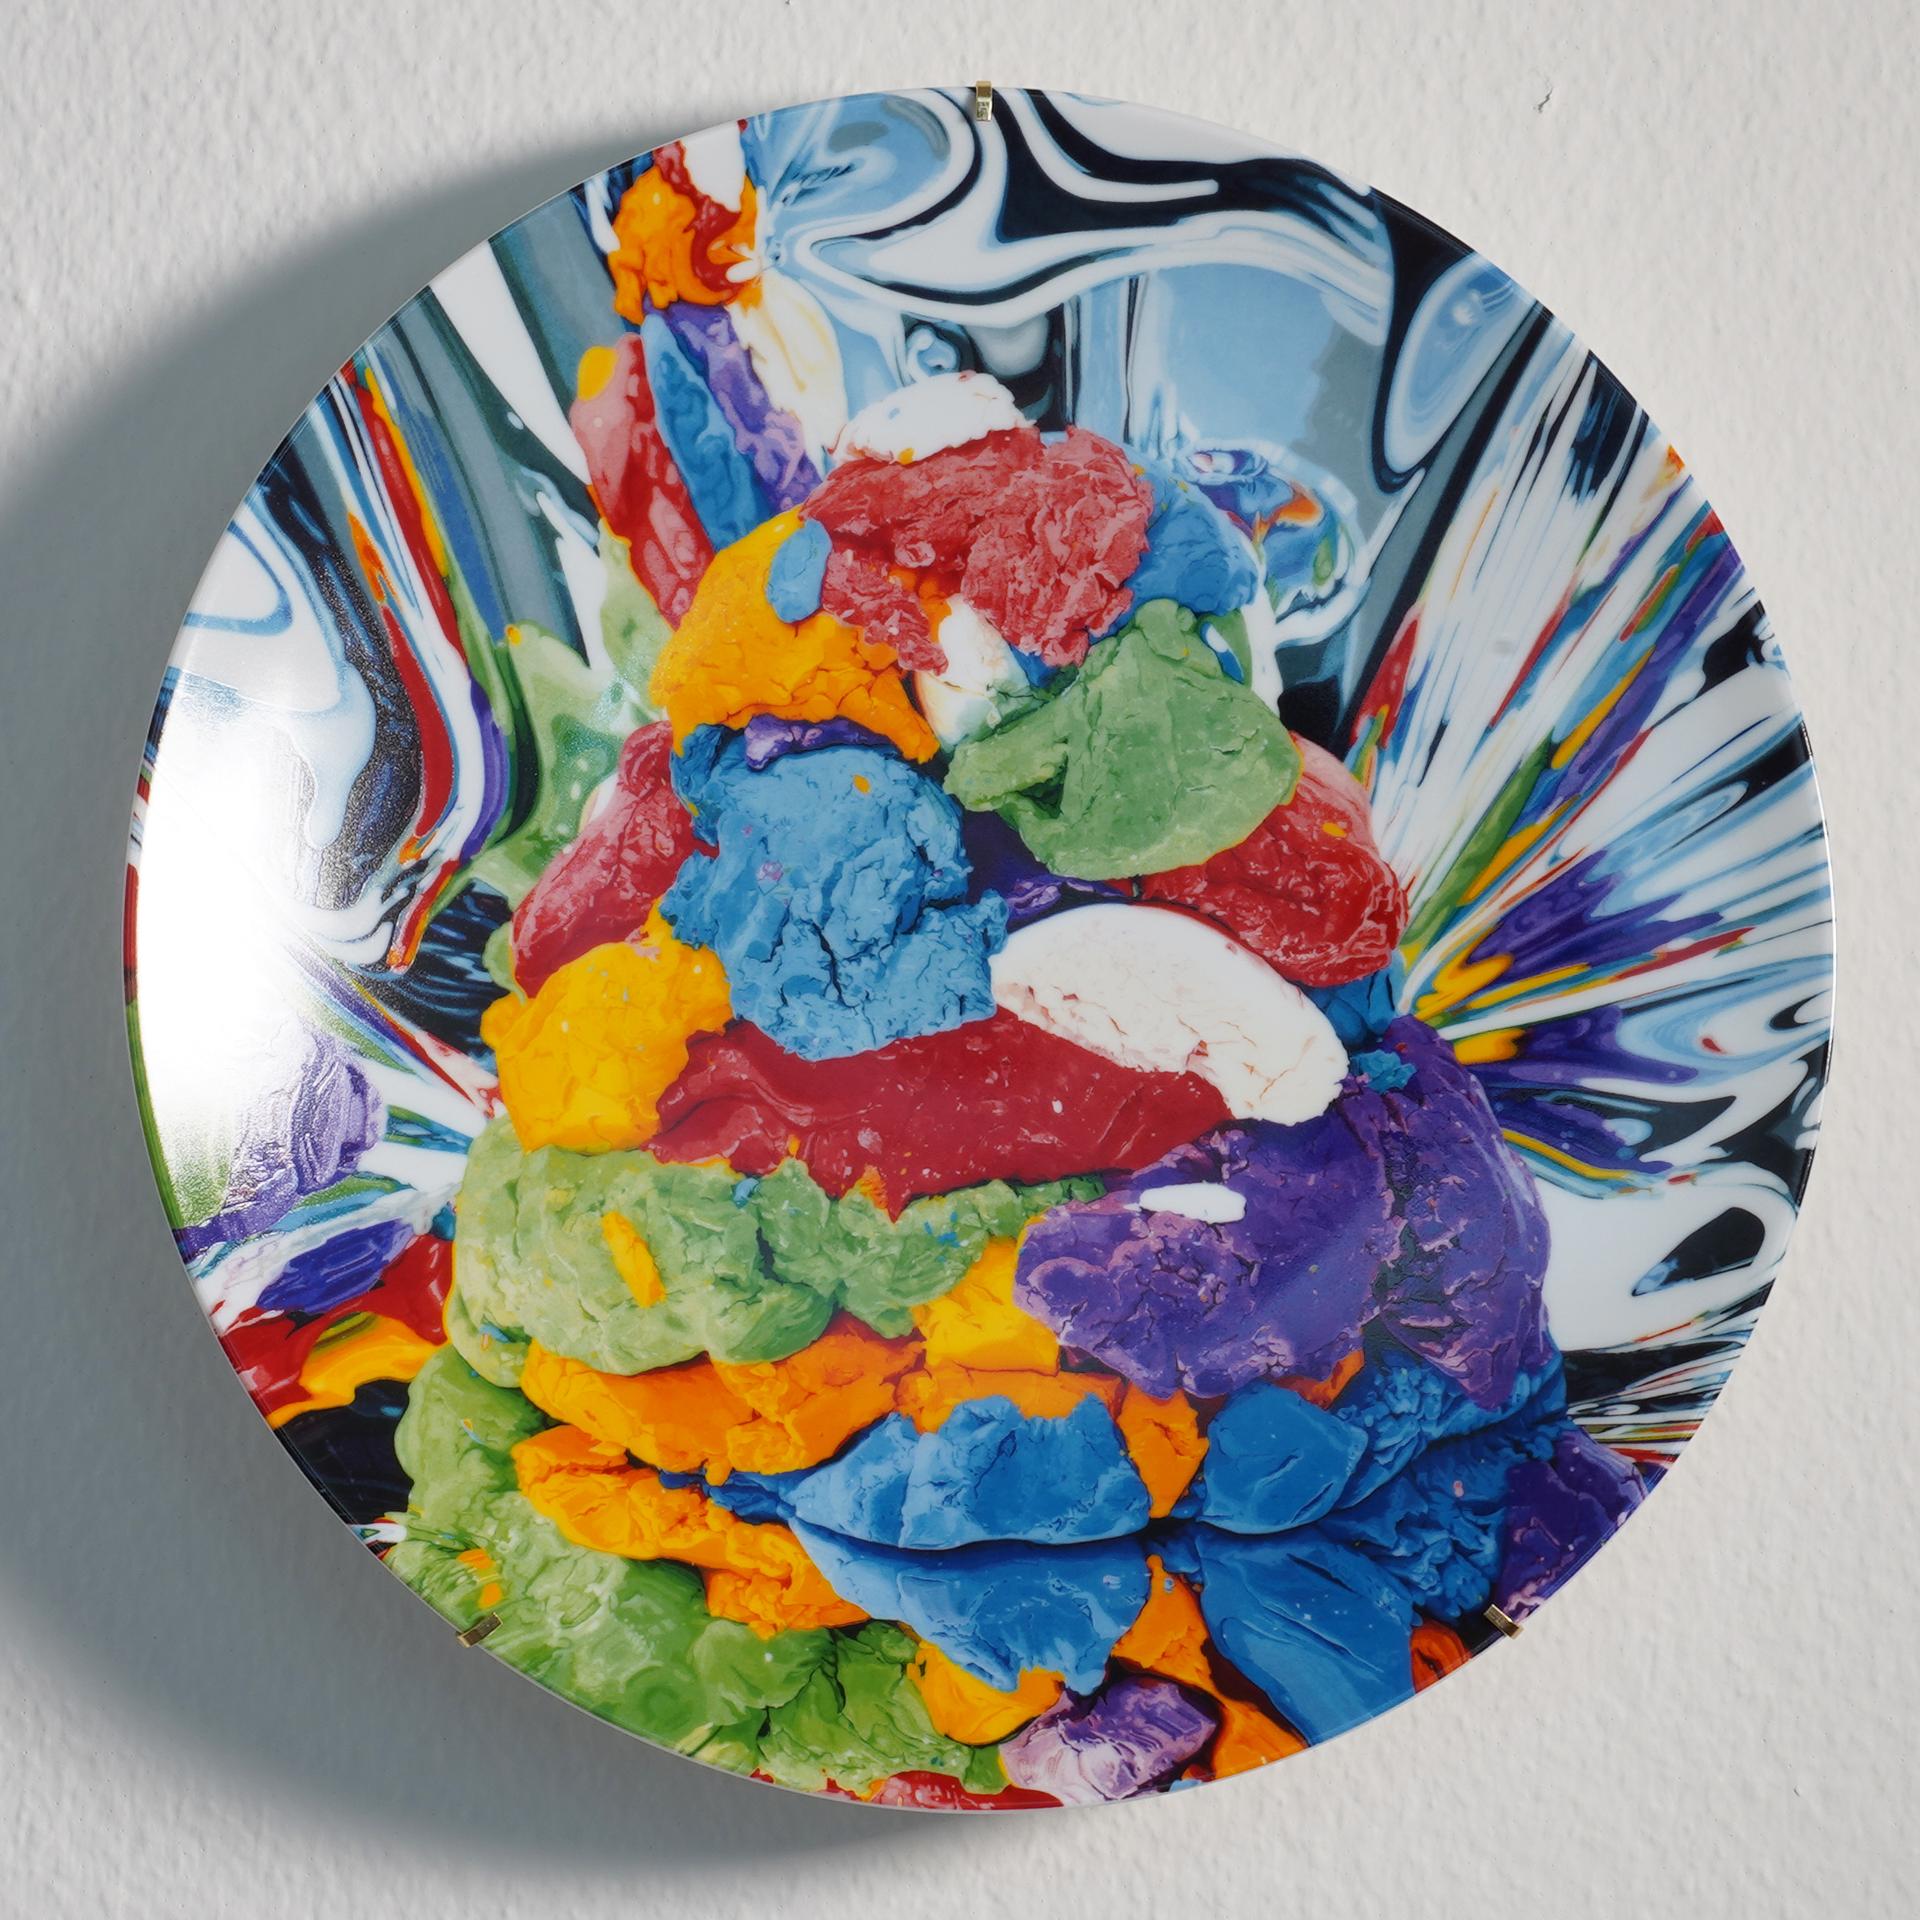 Jeff Koons (1955) - Play-Doh Coupe Plate, 2014